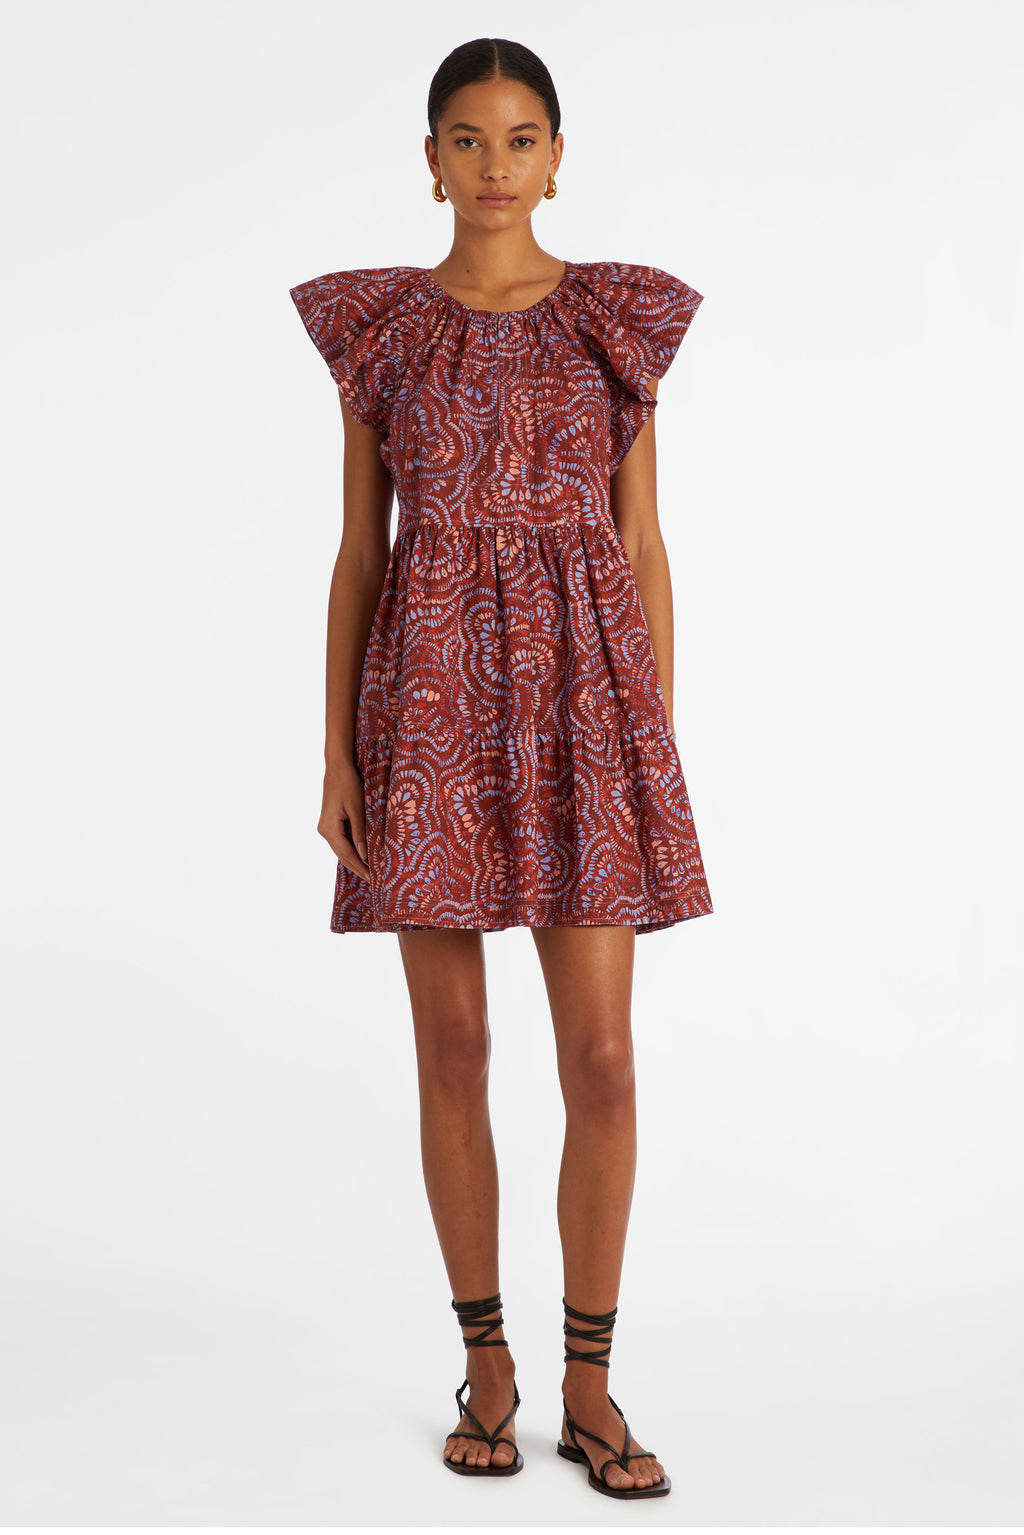 Short dress with large ruffled sleeves in a dark pink geometric print